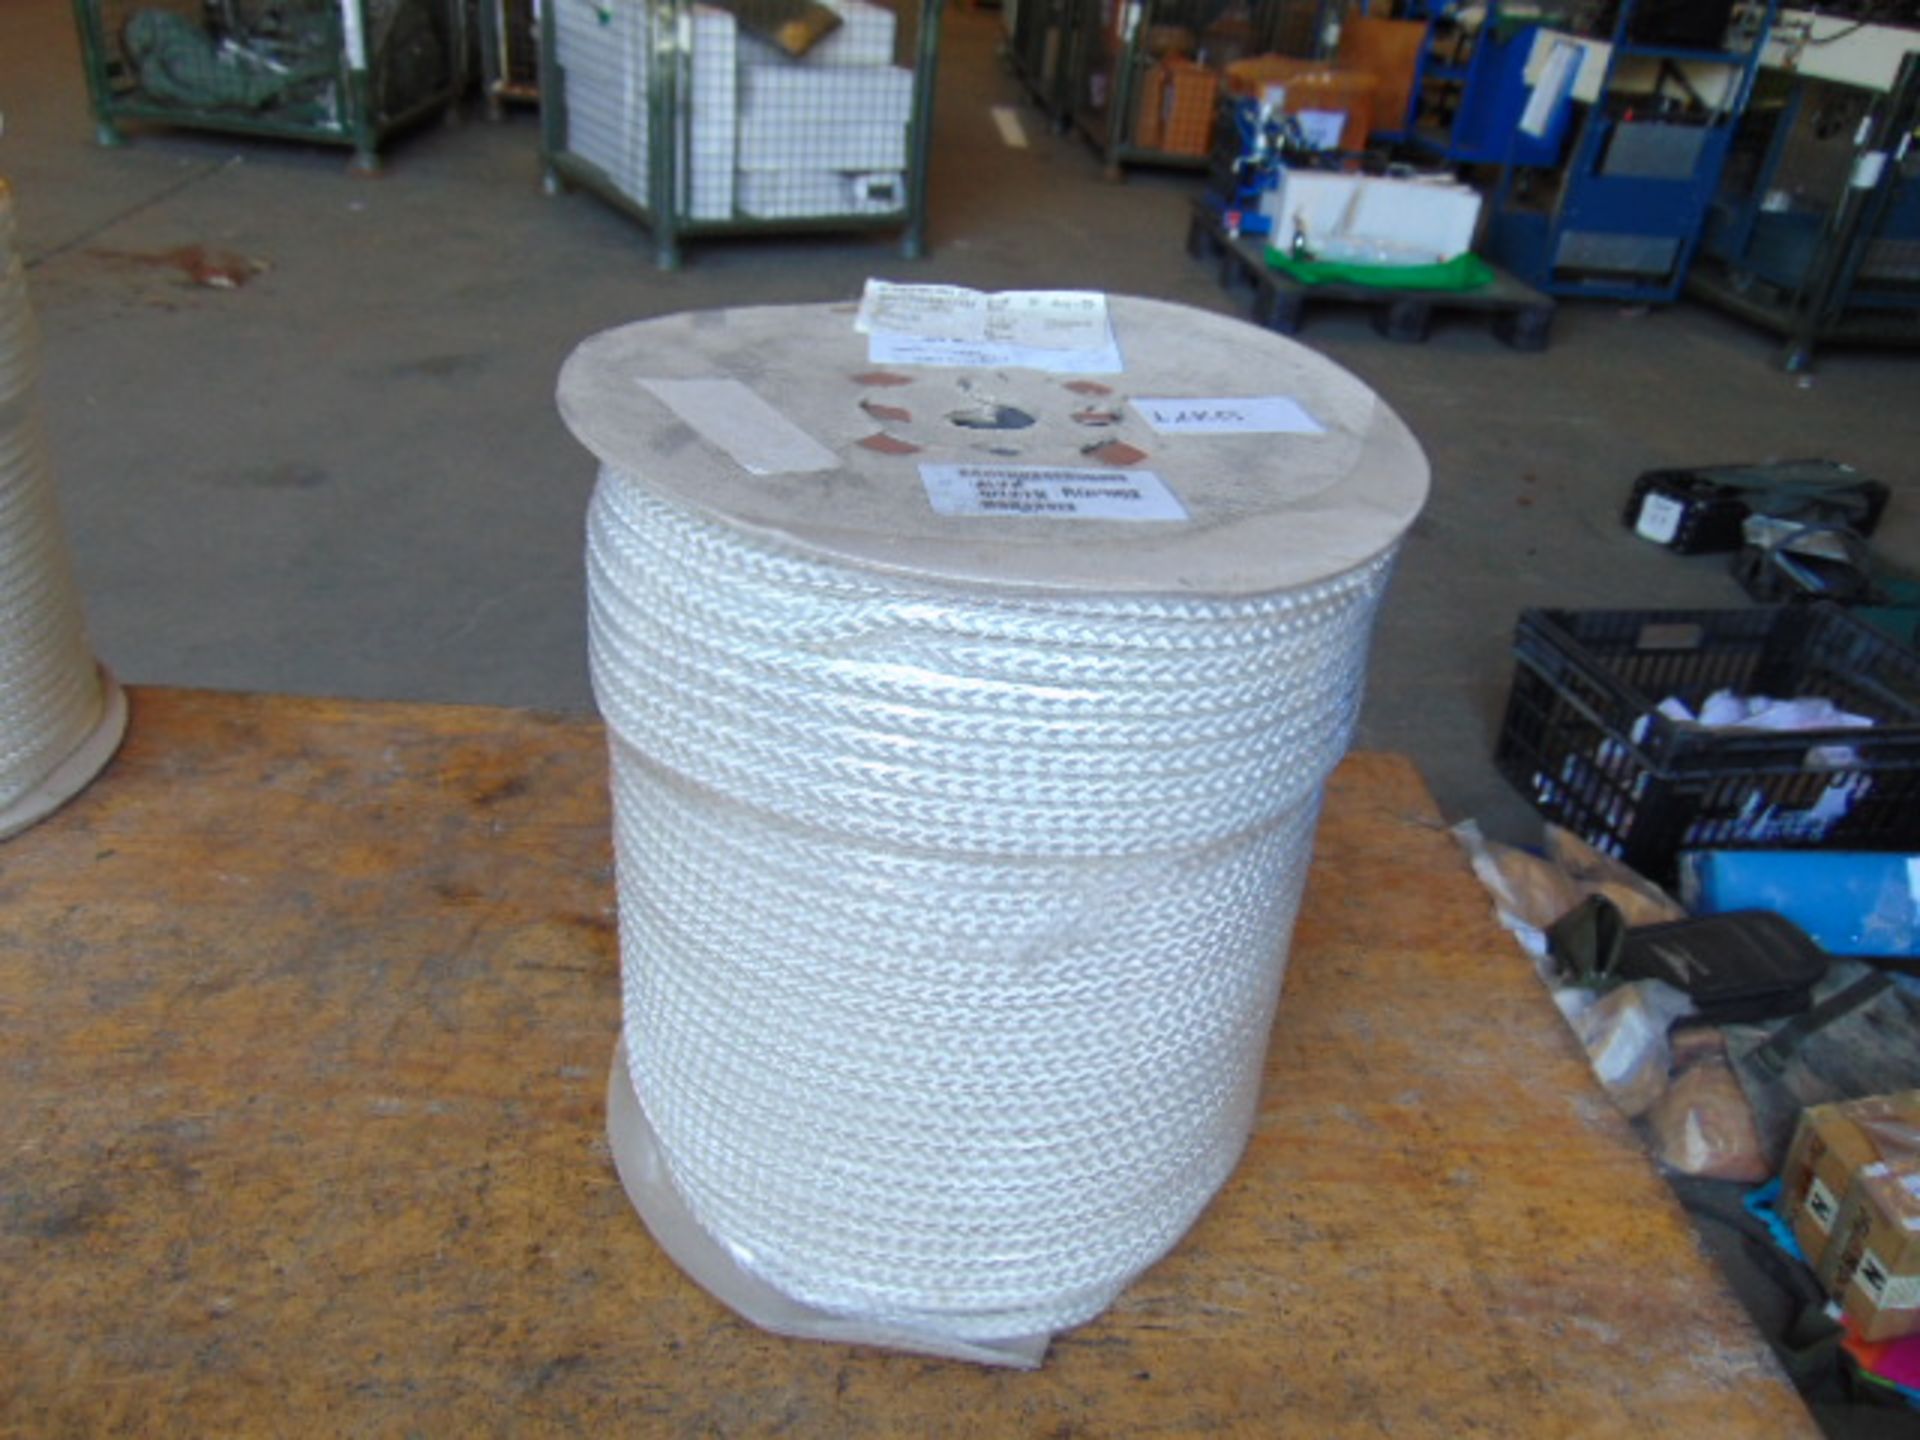 New Unissued 1 x 12kg (220m) Marine Quality Rope on Drum - Image 7 of 7